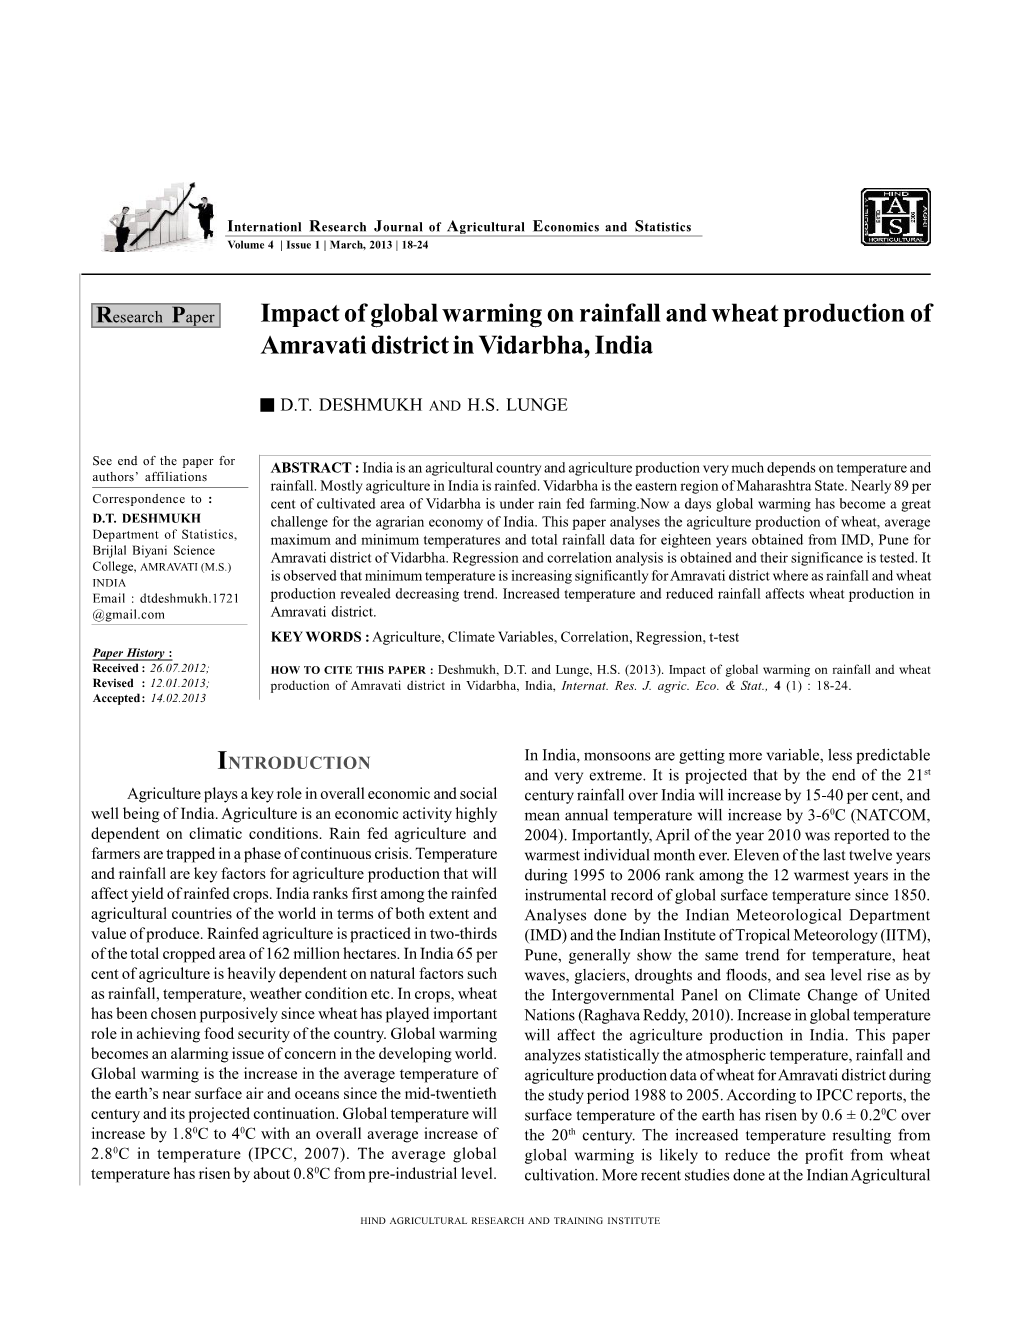 Impact of Global Warming on Rainfall and Wheat Production of Amravati District in Vidarbha, India